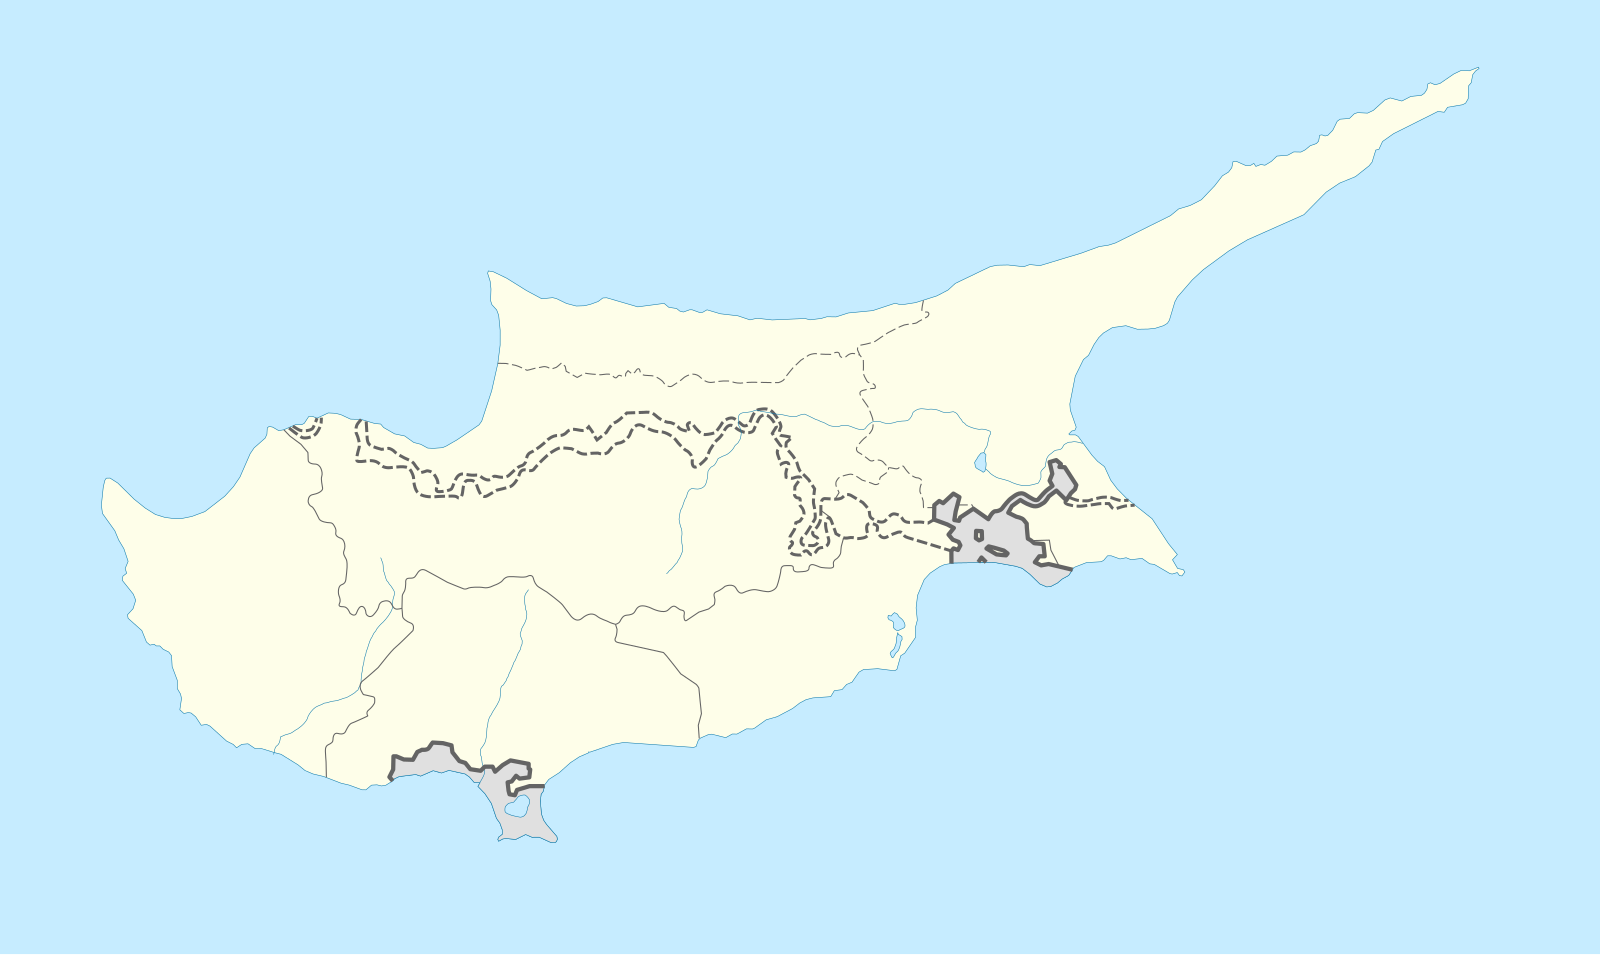 Cyprus problem is located in Cyprus